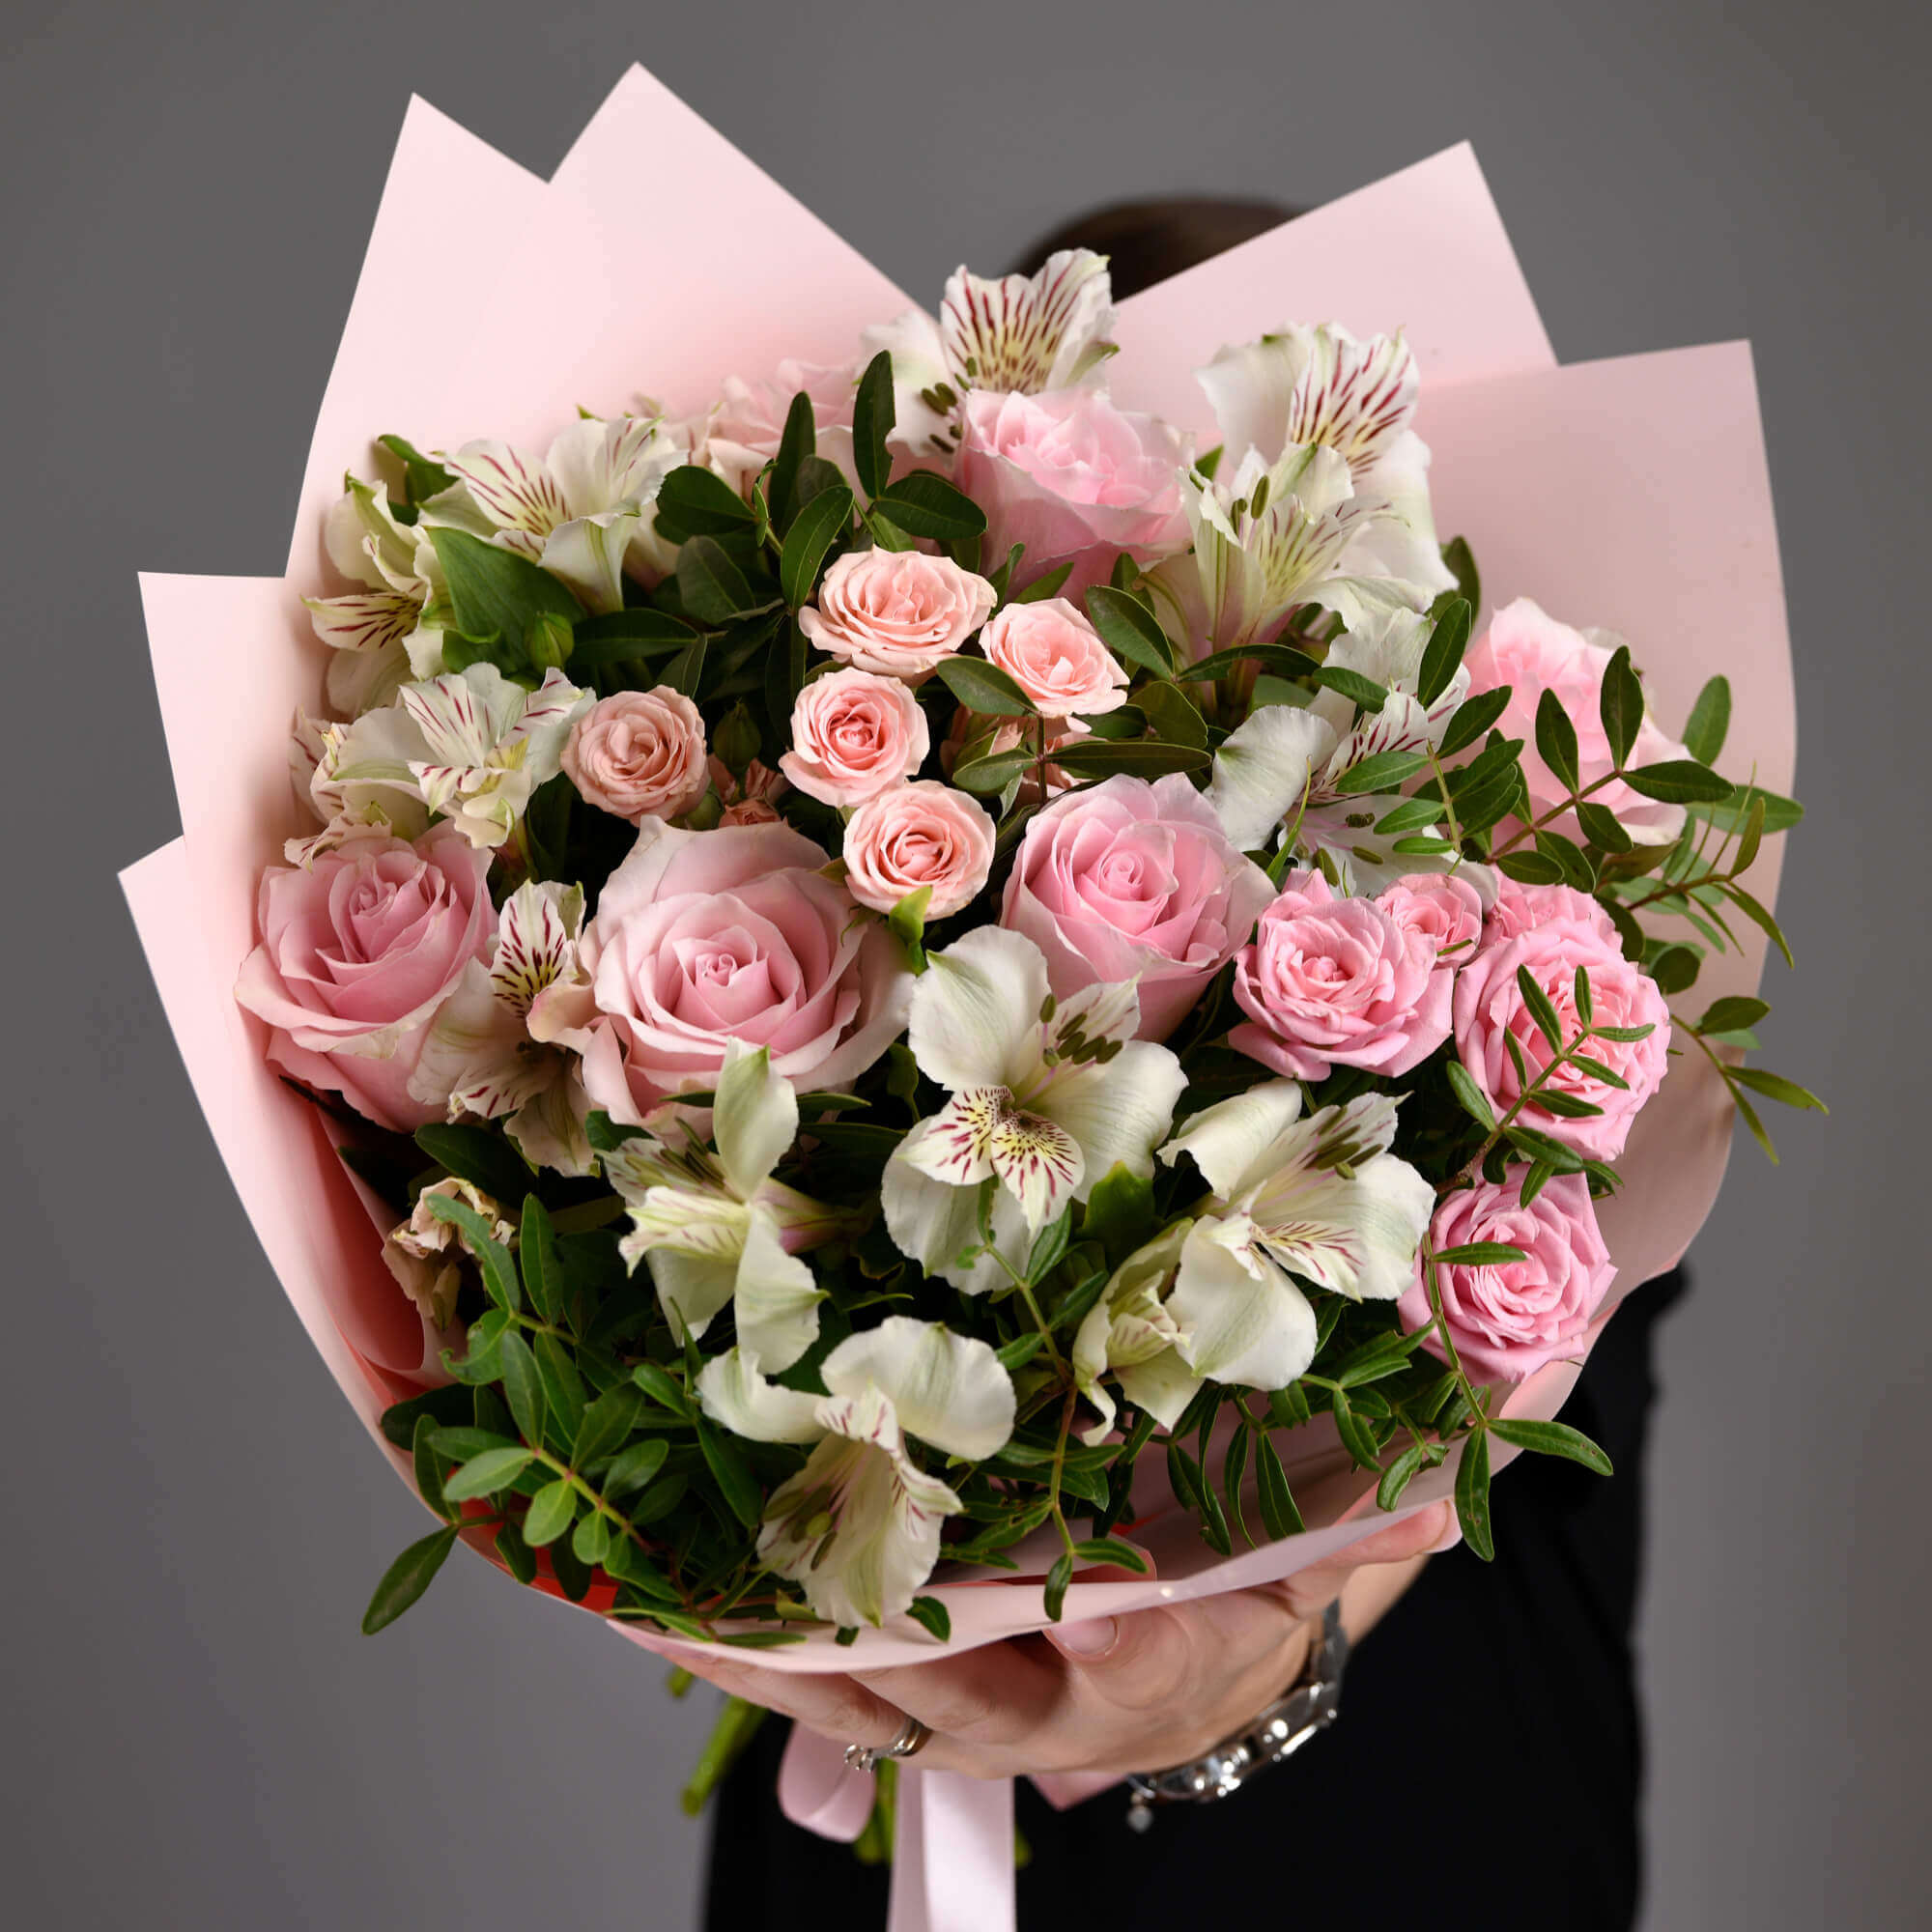 Bouquet with pink roses, alstroemeria and mini roses